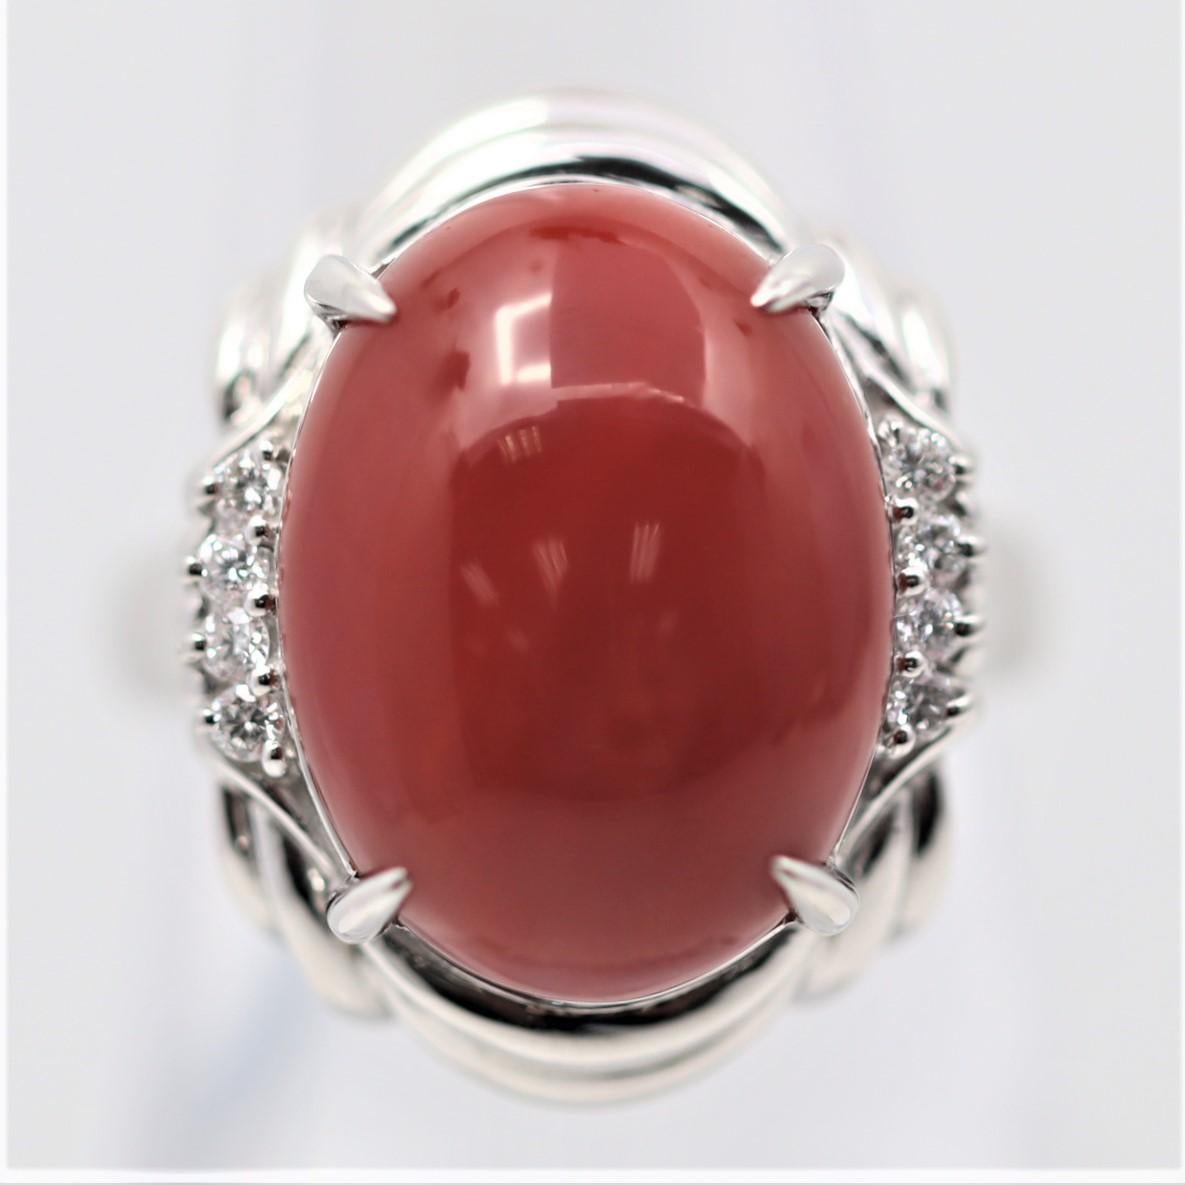 A stylish and sturdy platinum made ring featuring a lovely red coral. It has a rich deep color and a lovely oval cabochon shape. It is accented by 0.10 carats of round brilliant-cut diamonds which add brilliance and sparkle to the ring.